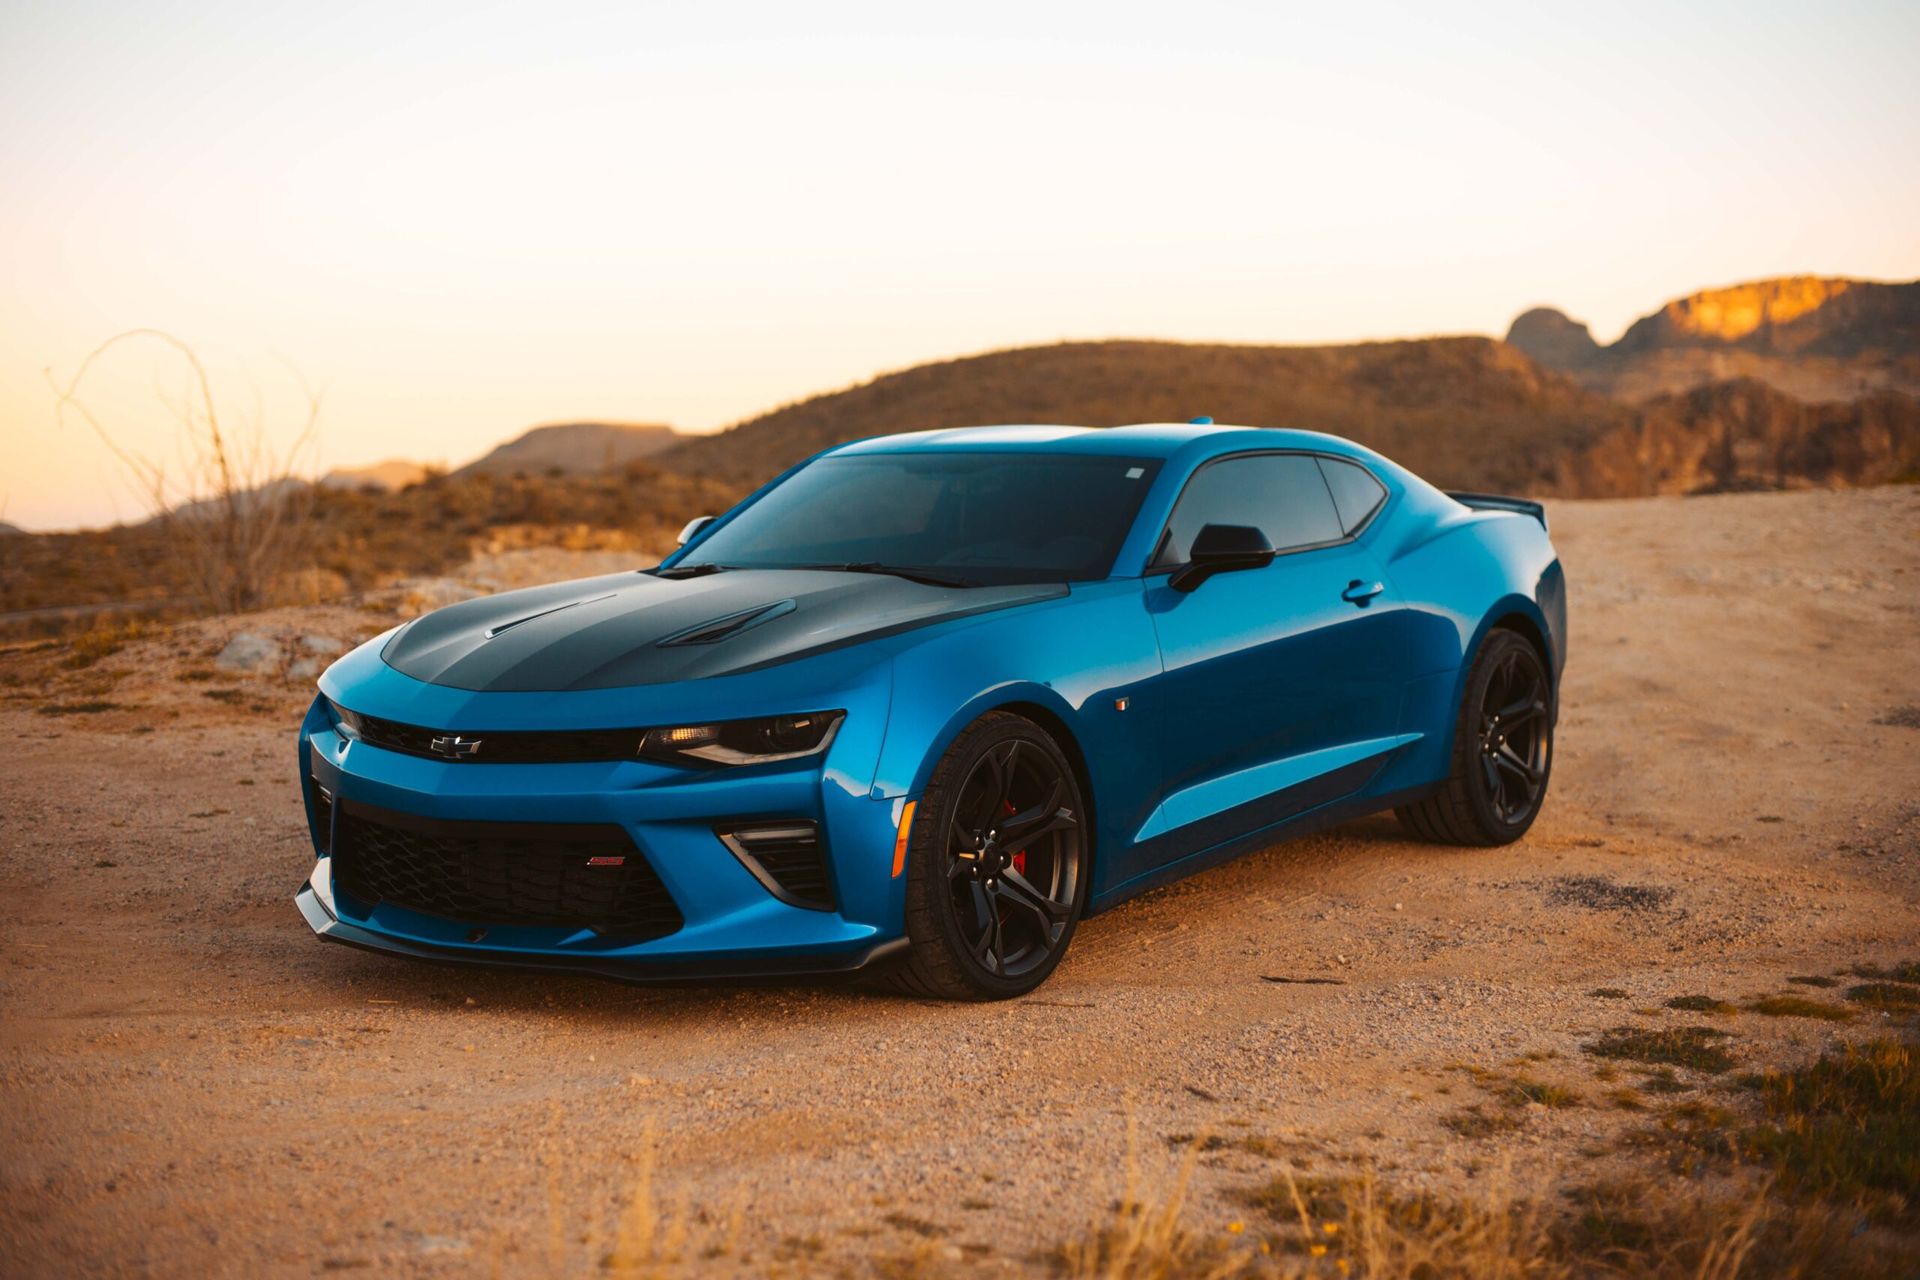 A blue chevrolet camaro is parked on a dirt road in the desert.